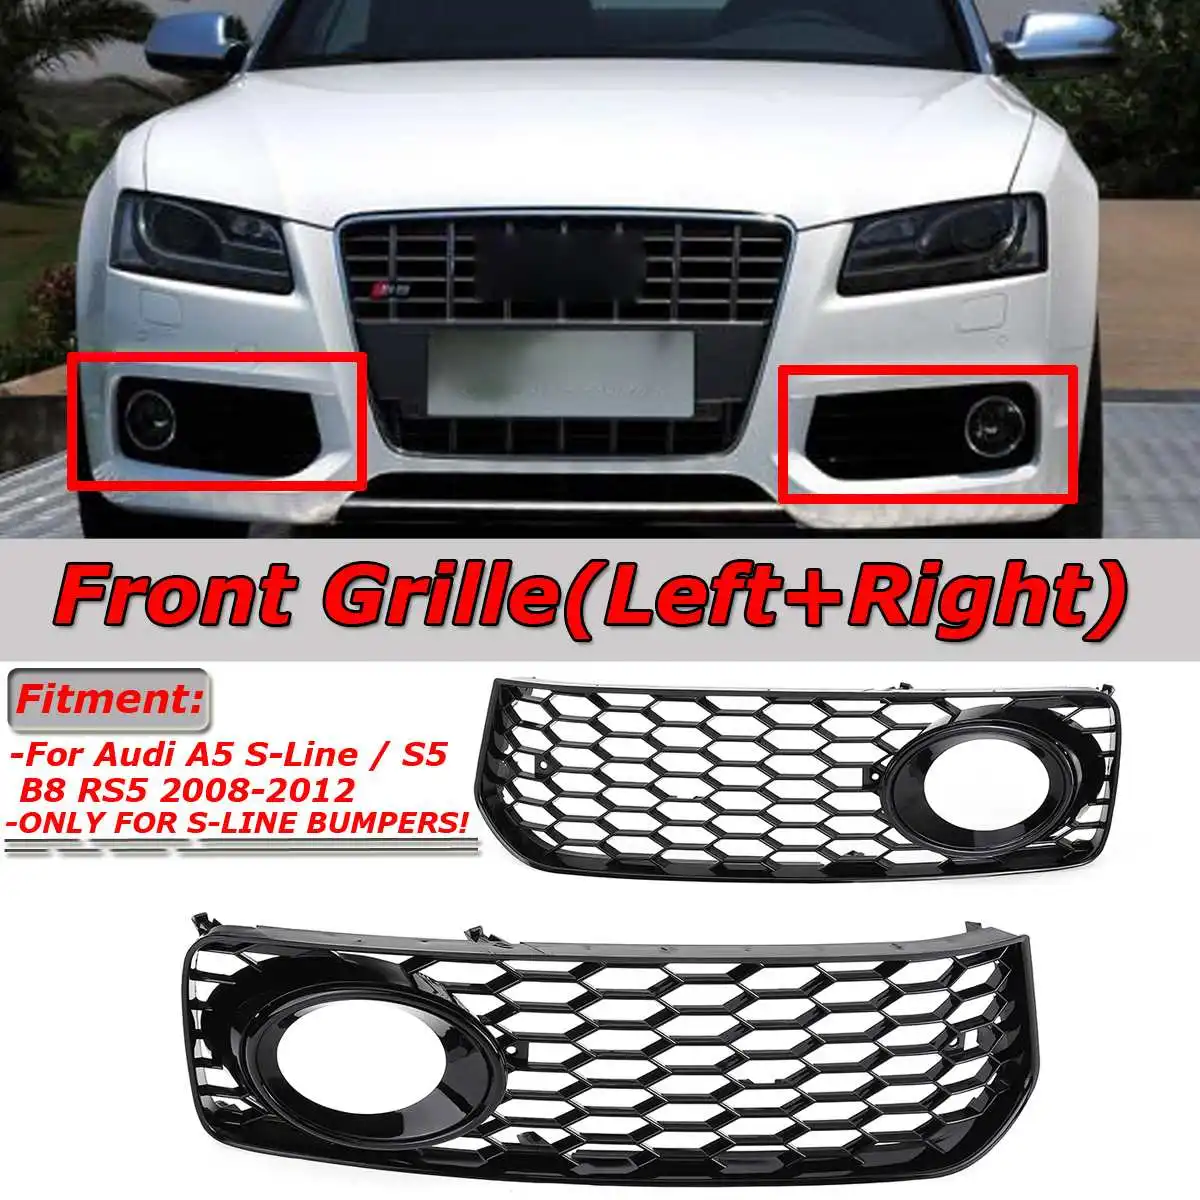 

Black/Chrome Silver 1Pair Car Fog Light Lamp Cover Honeycomb Mesh Hex Front Grille Grill For Audi A5 S-Line/S5 B8 RS5 2008-2012